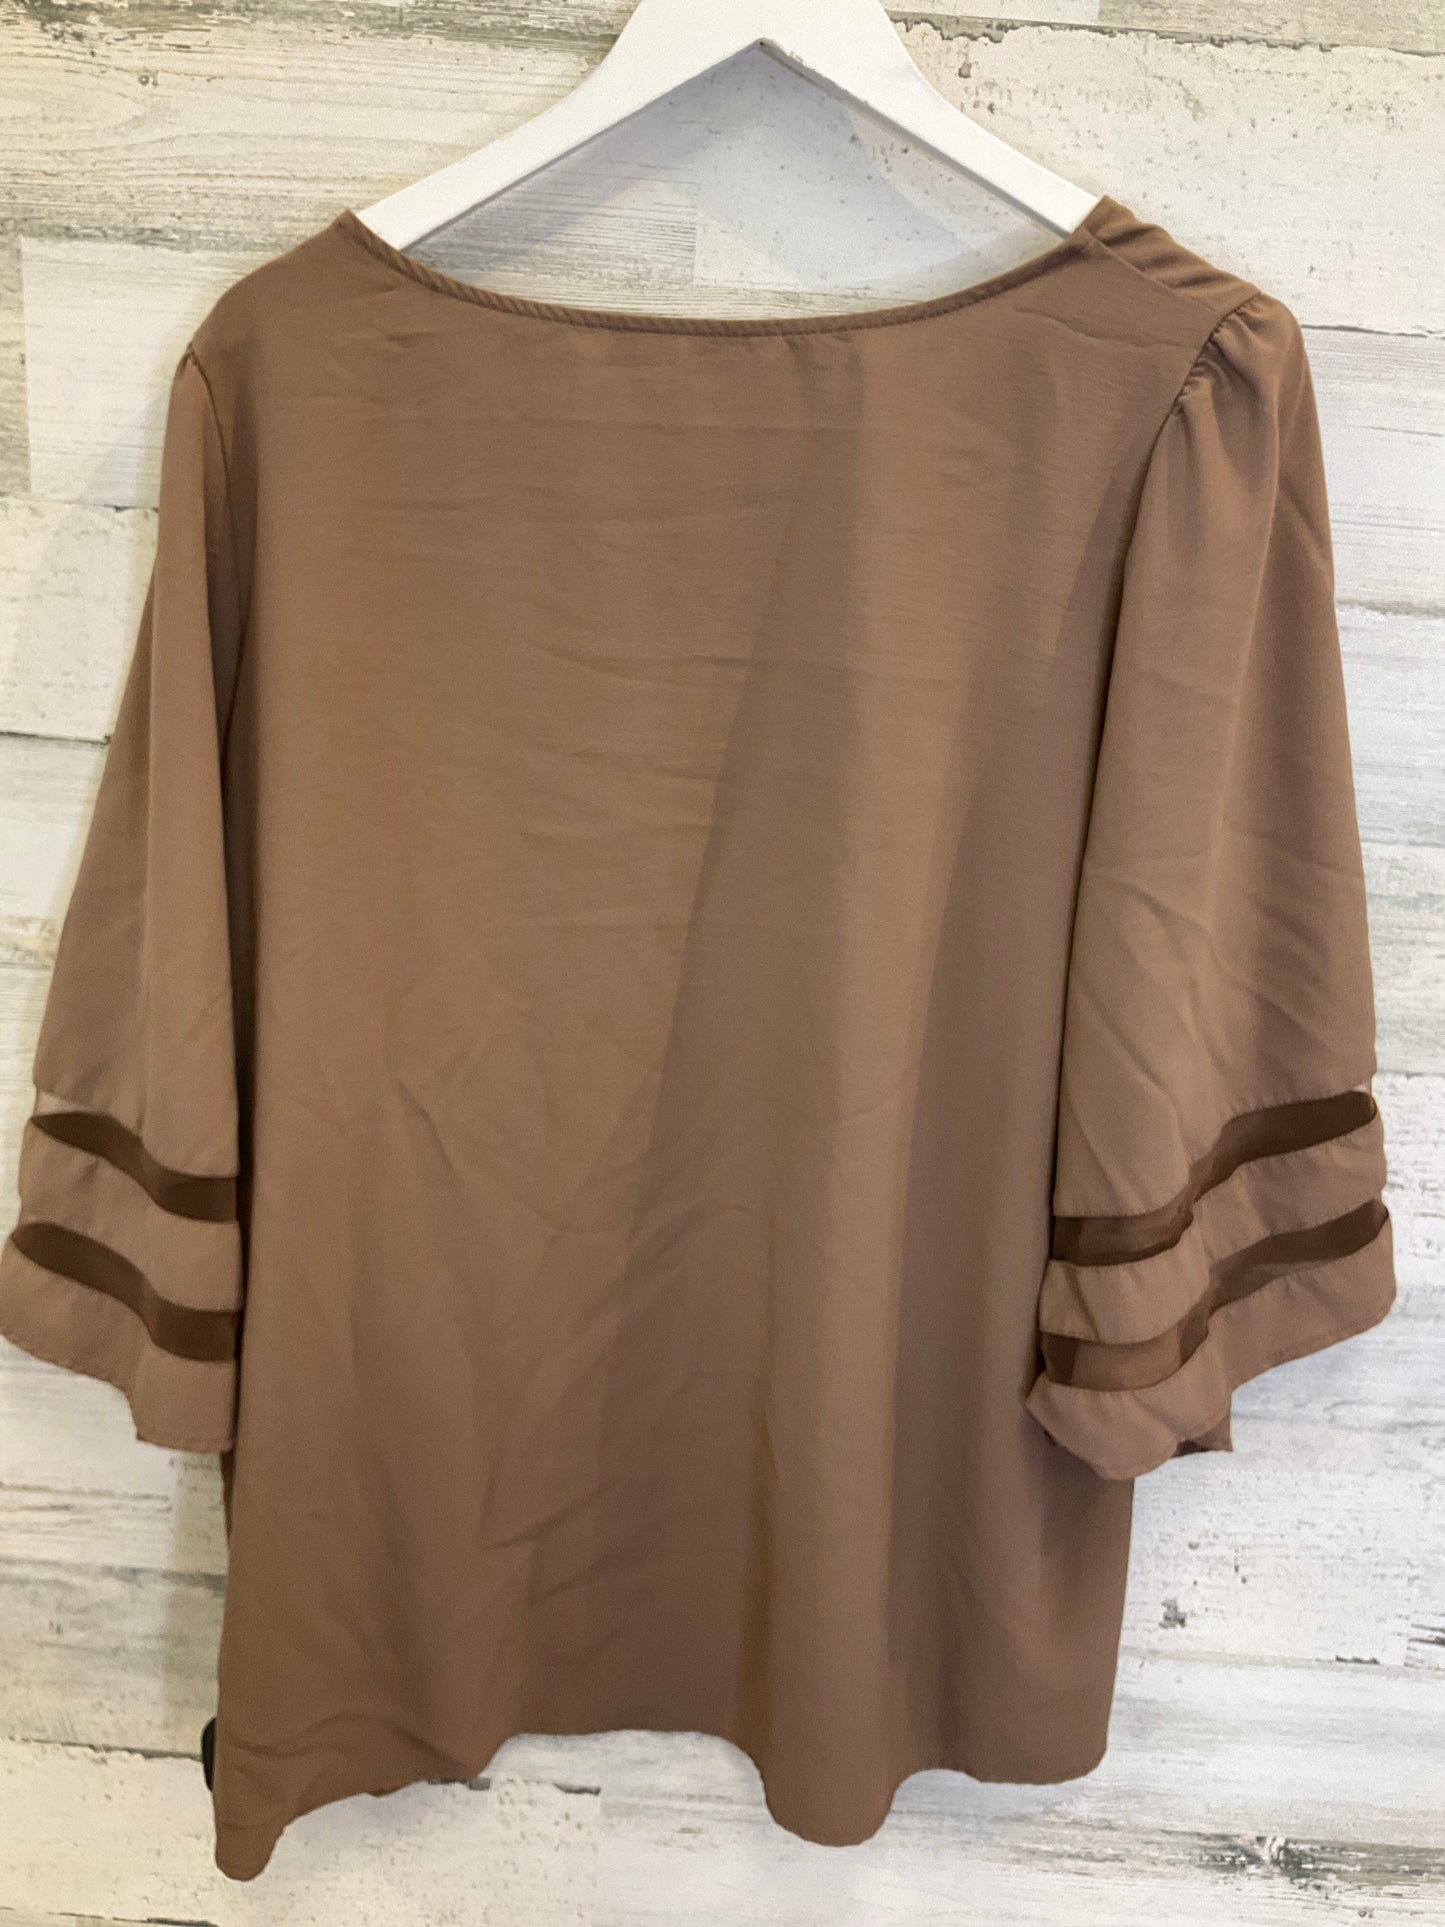 Brown Top Short Sleeve Clothes Mentor, Size 2x